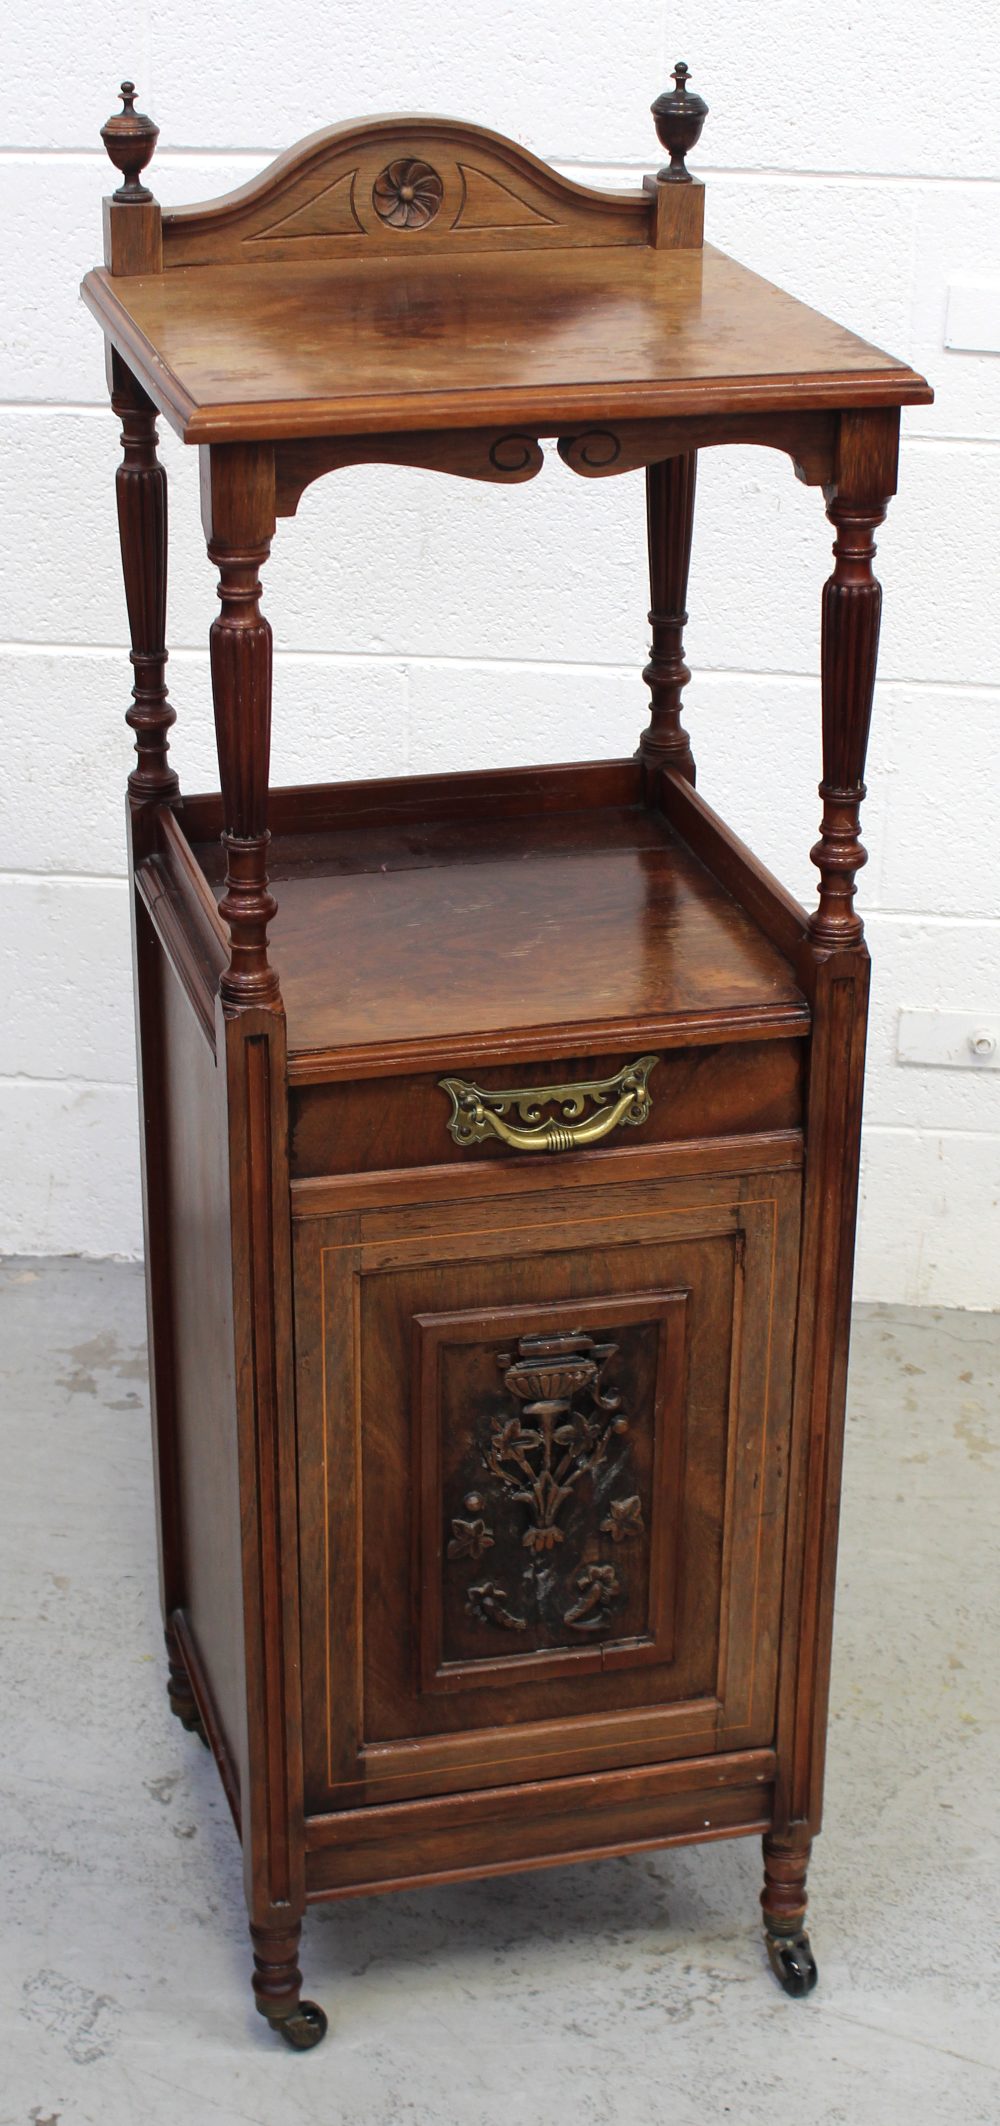 An Edwardian rosewood Arts and Crafts coal bin with carved central door above turned supports to